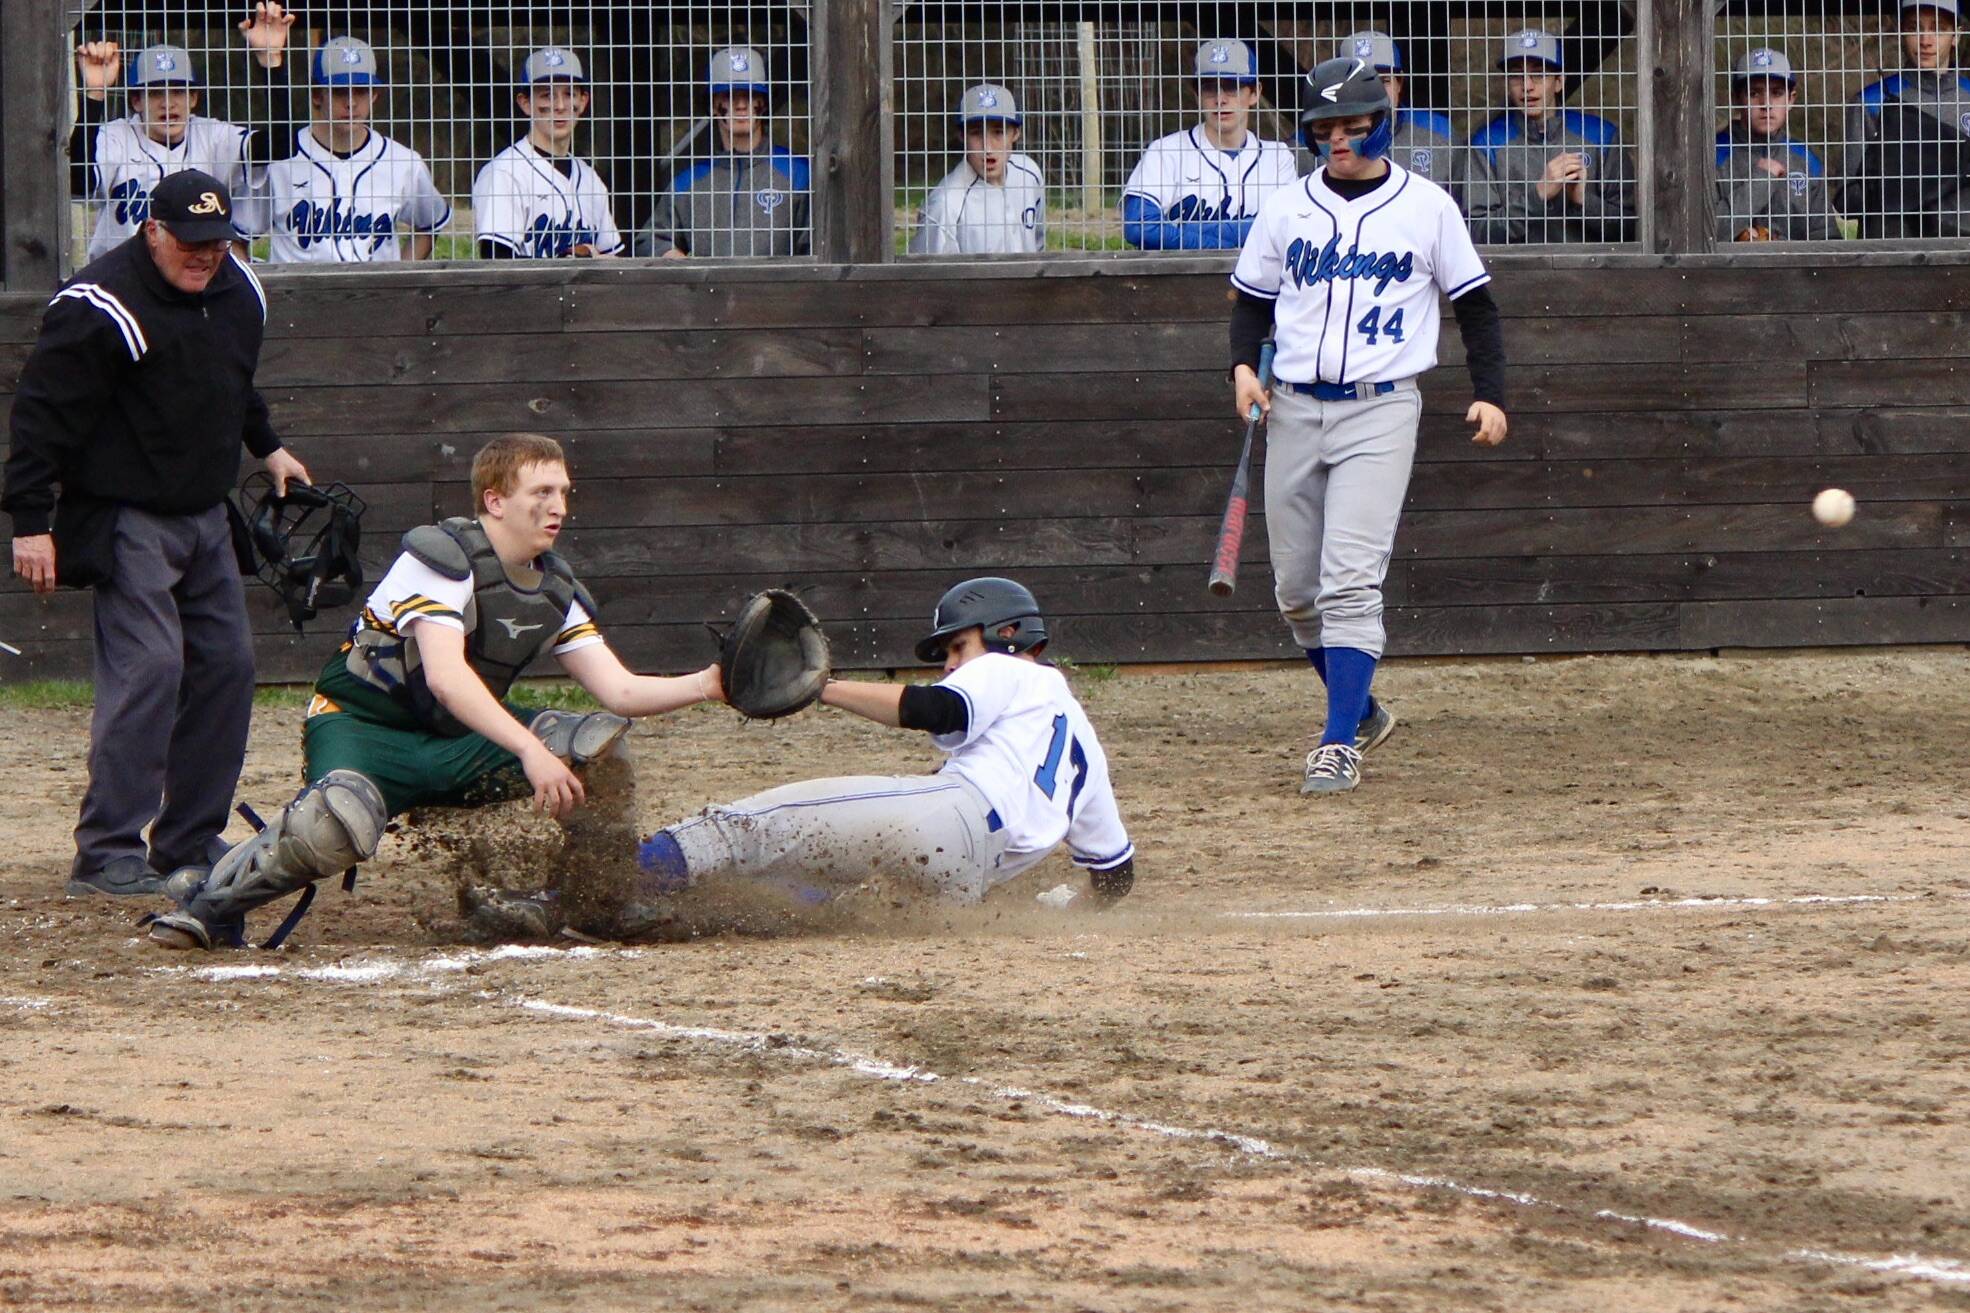 Corey Wiscomb/contributed photo
Remy Lago blazes his way across home plate to score an important run in the late innings during the Vikings’ comeback victory on Friday.